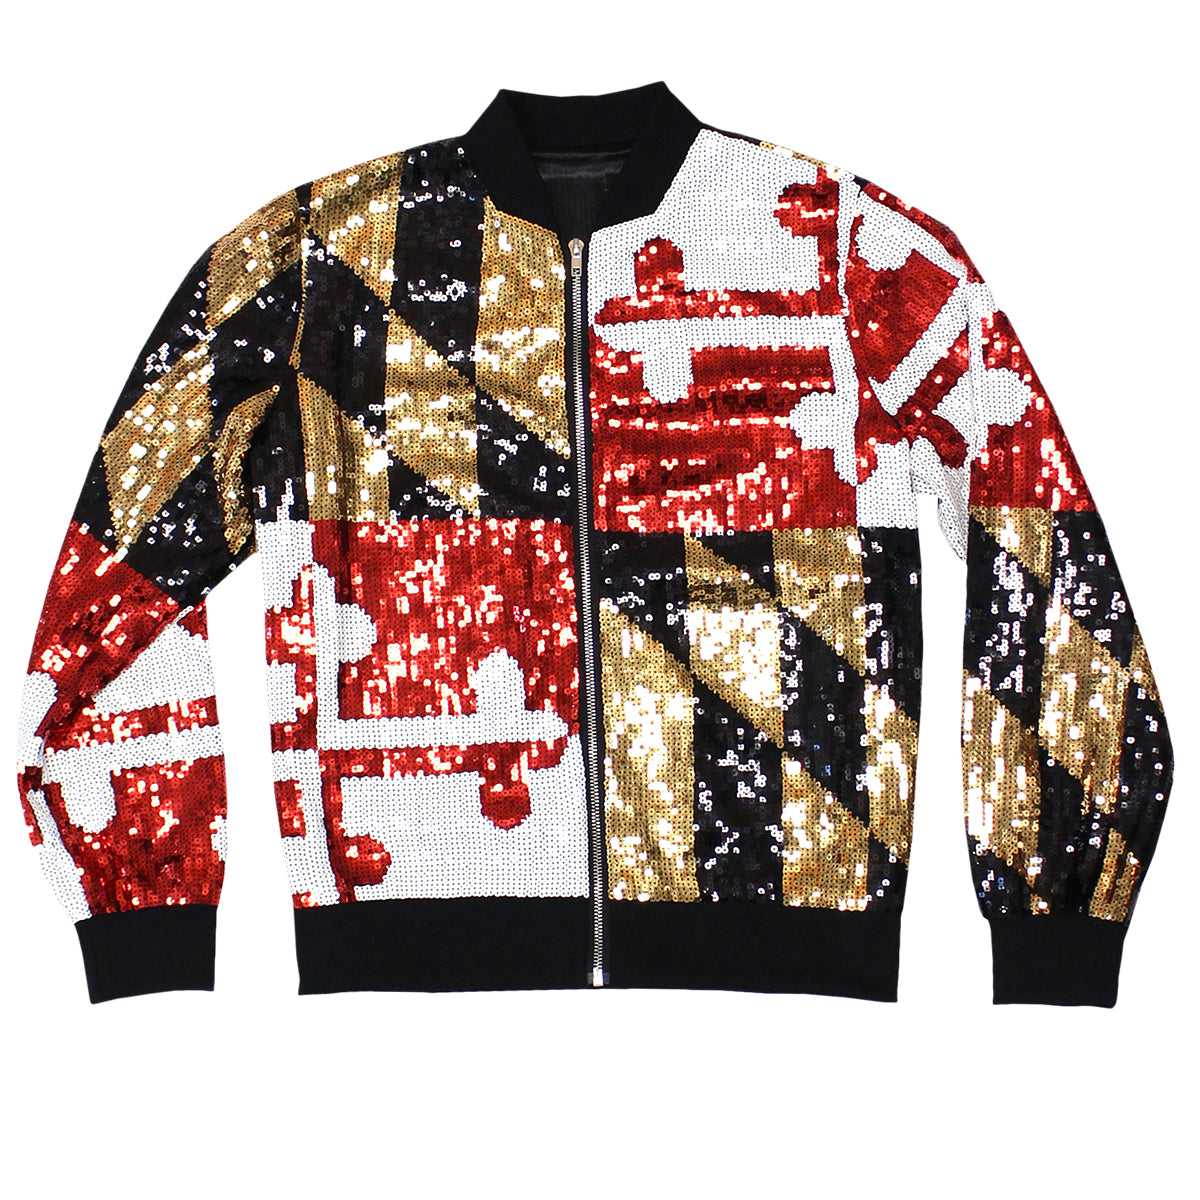 *PRE-ORDER* Maryland Flag / Sequin Jacket (Estimated Ship Date: 7/1) - Route One Apparel